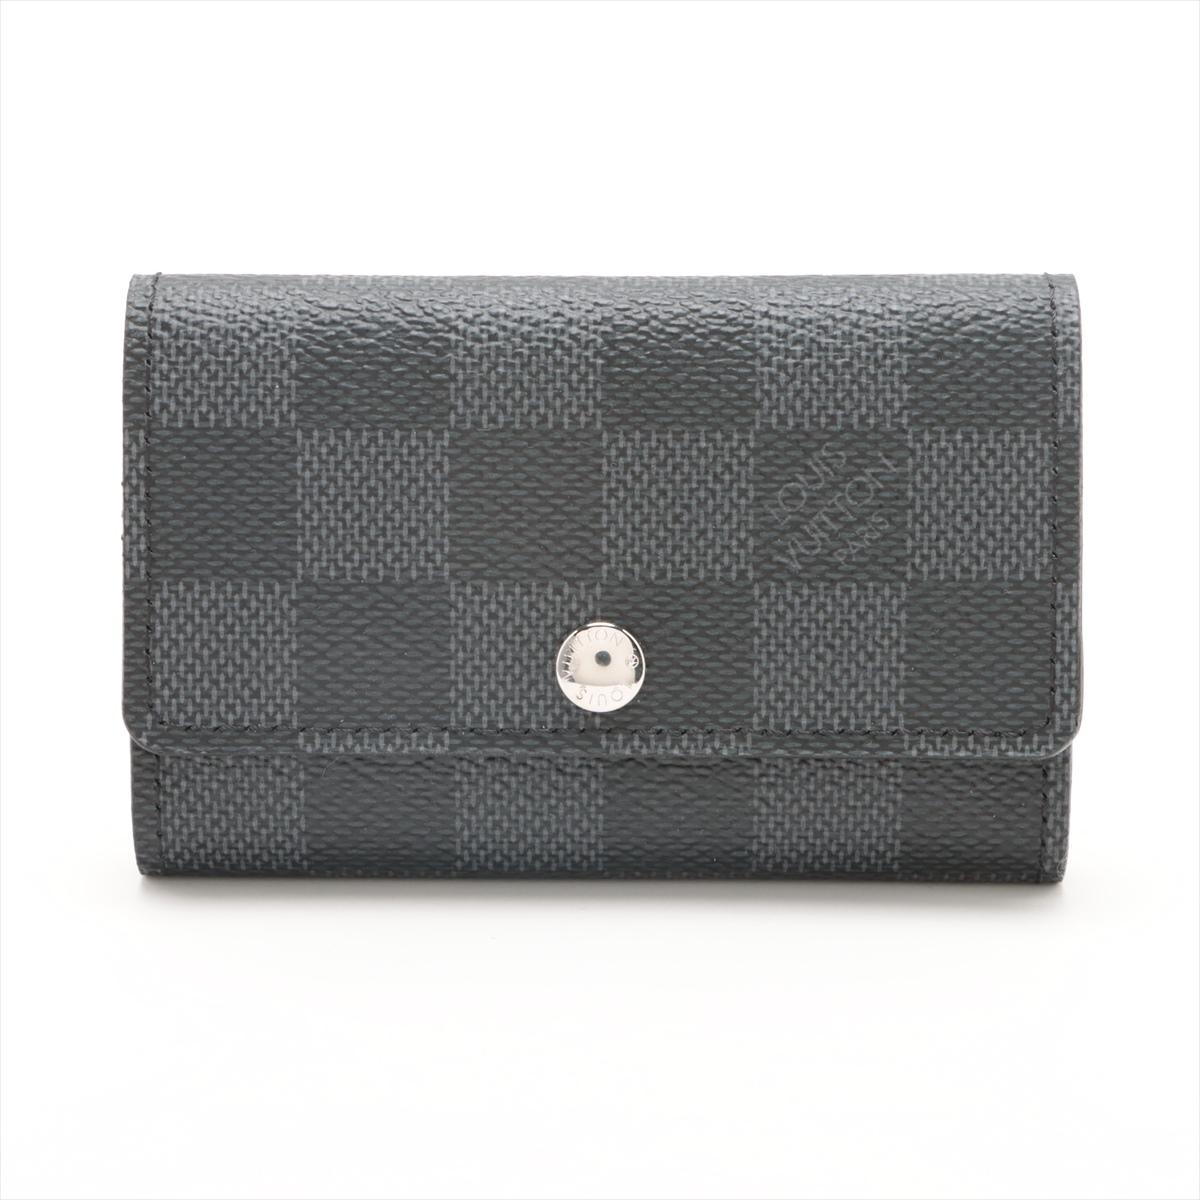 The Louis Vuitton Damier Graphite Multiclés 6 Key Holder a refined and practical accessory designed to keep your keys organized in style. Meticulously crafted by Louis Vuitton, the key holder features iconic Damier Graphite canvas, presenting a